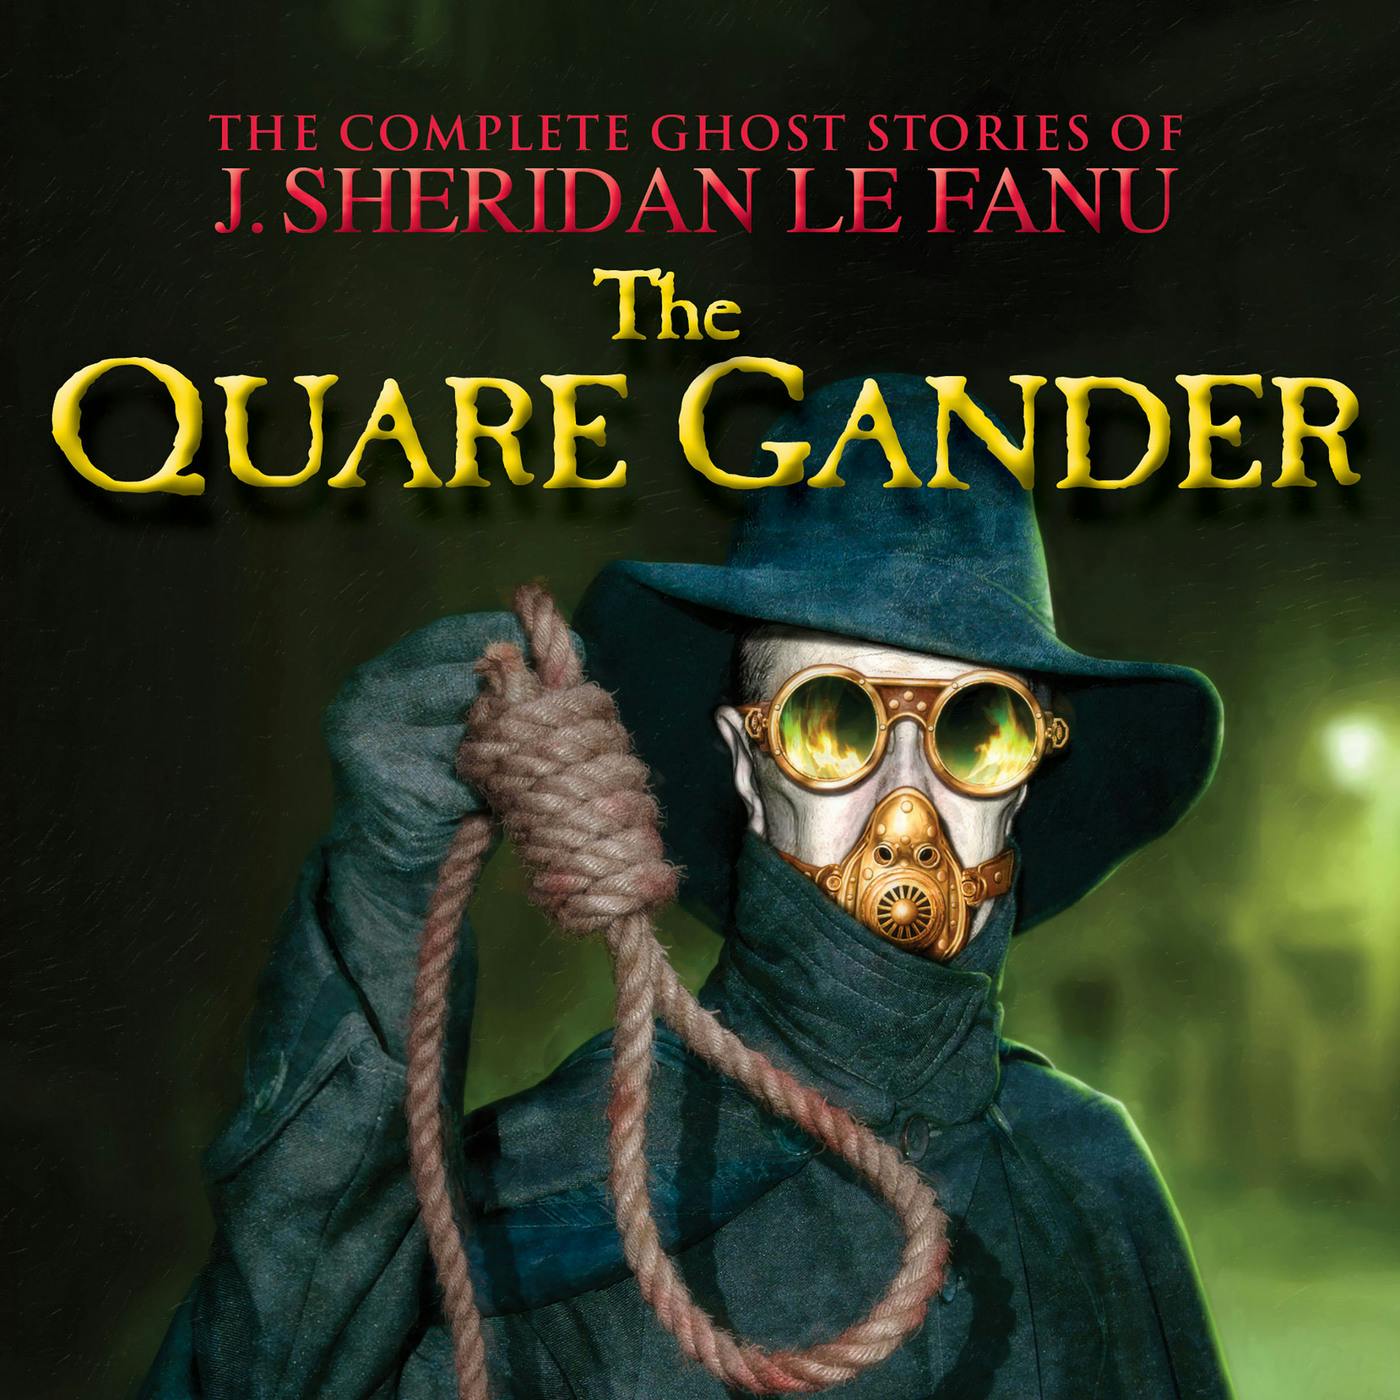 The Quare Gander - The Complete Ghost Stories of J. Sheridan Le Fanu, Vol. 6 of 30 (Unabridged) - J. Sheridan Le Fanu